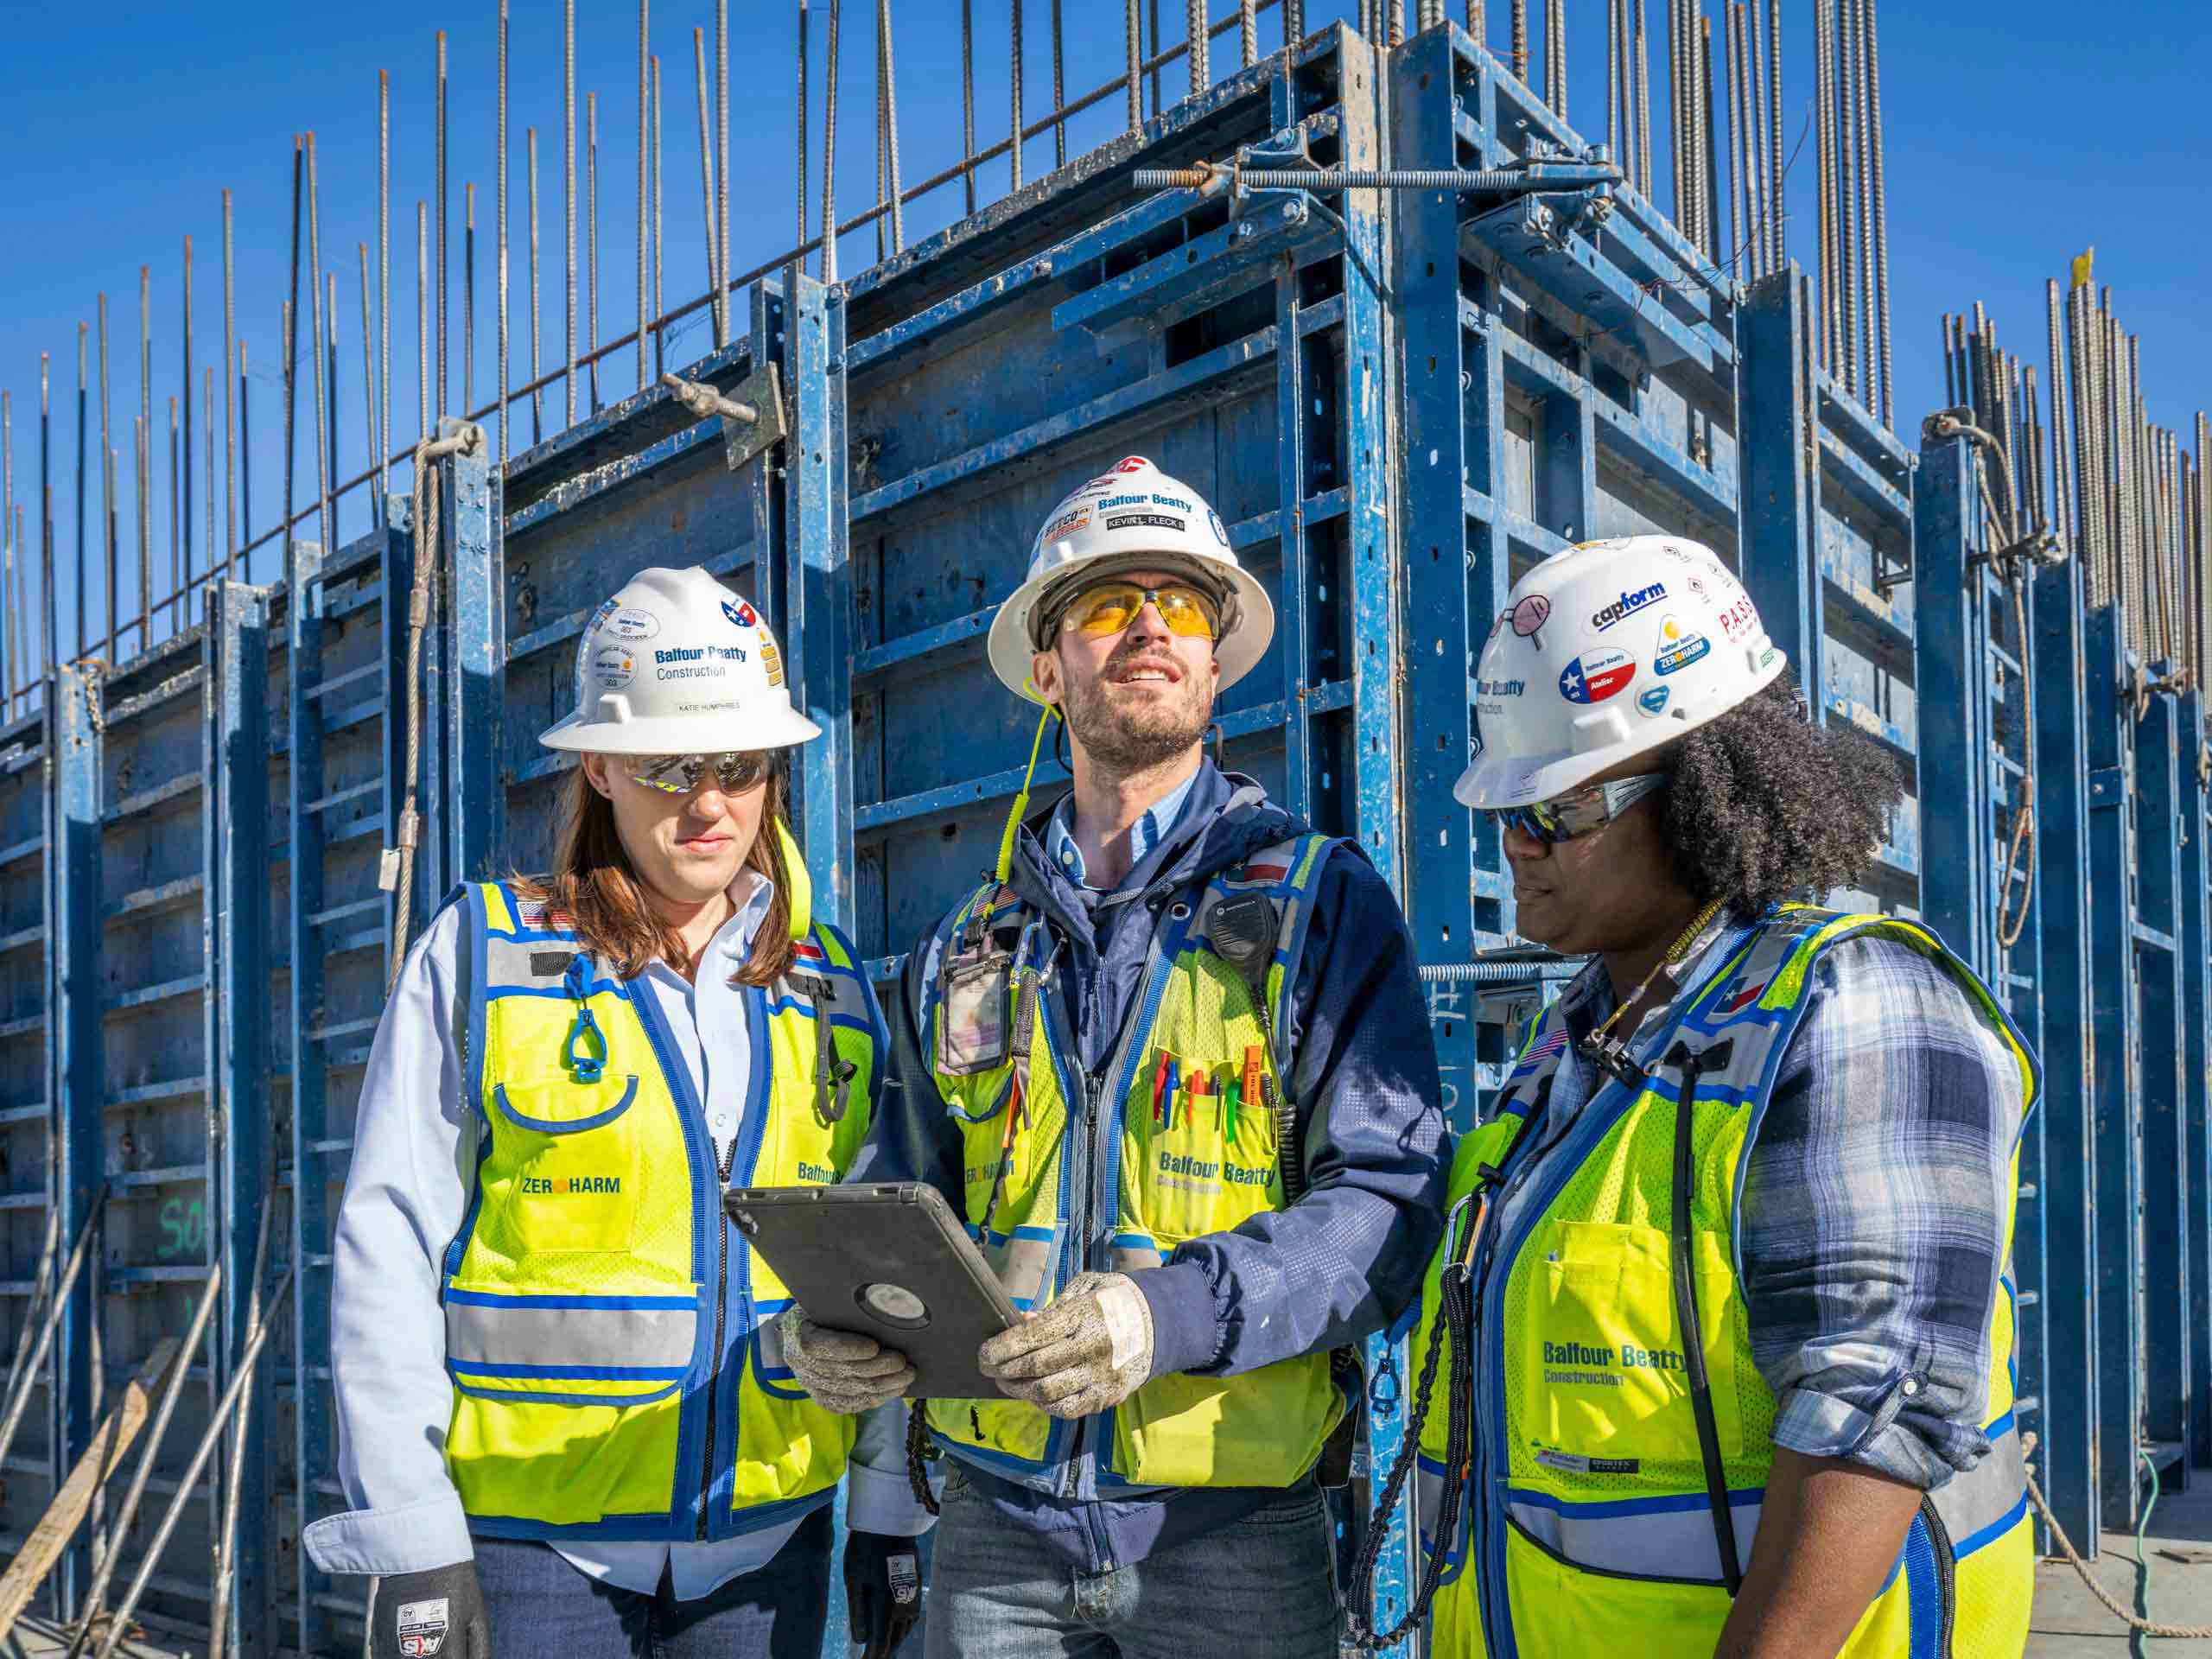 Award-Winning Balfour Beatty Annual Report Featuring Empowered Employees at Construction Site